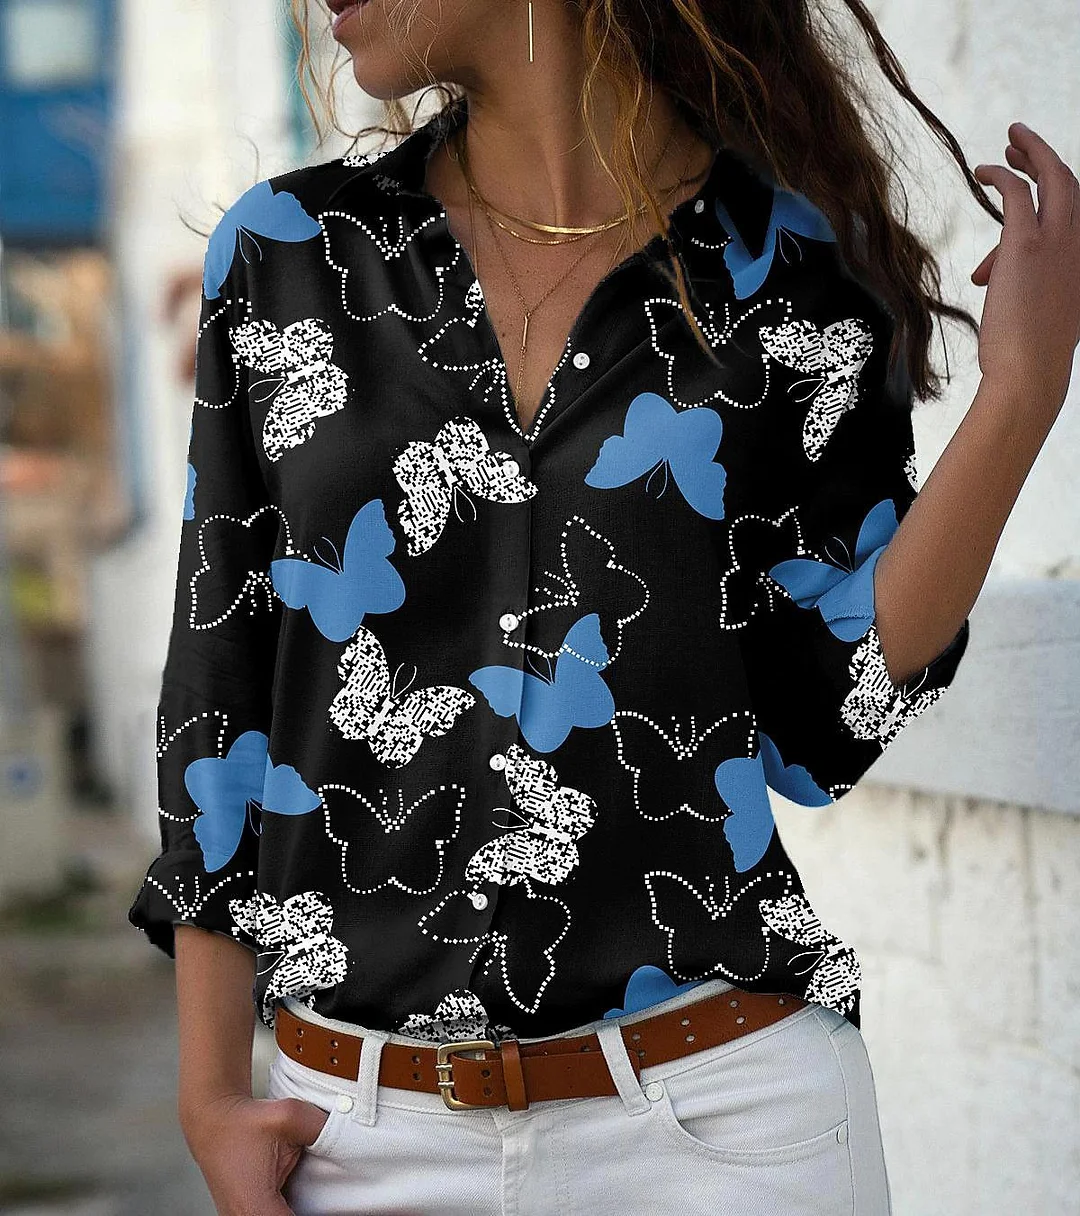 Butterfly Print Blouses For Women Turn-down Collar Long Sleeve Elegant Office Lady Tops Casual Plus Size Fashion Shirts Blusas